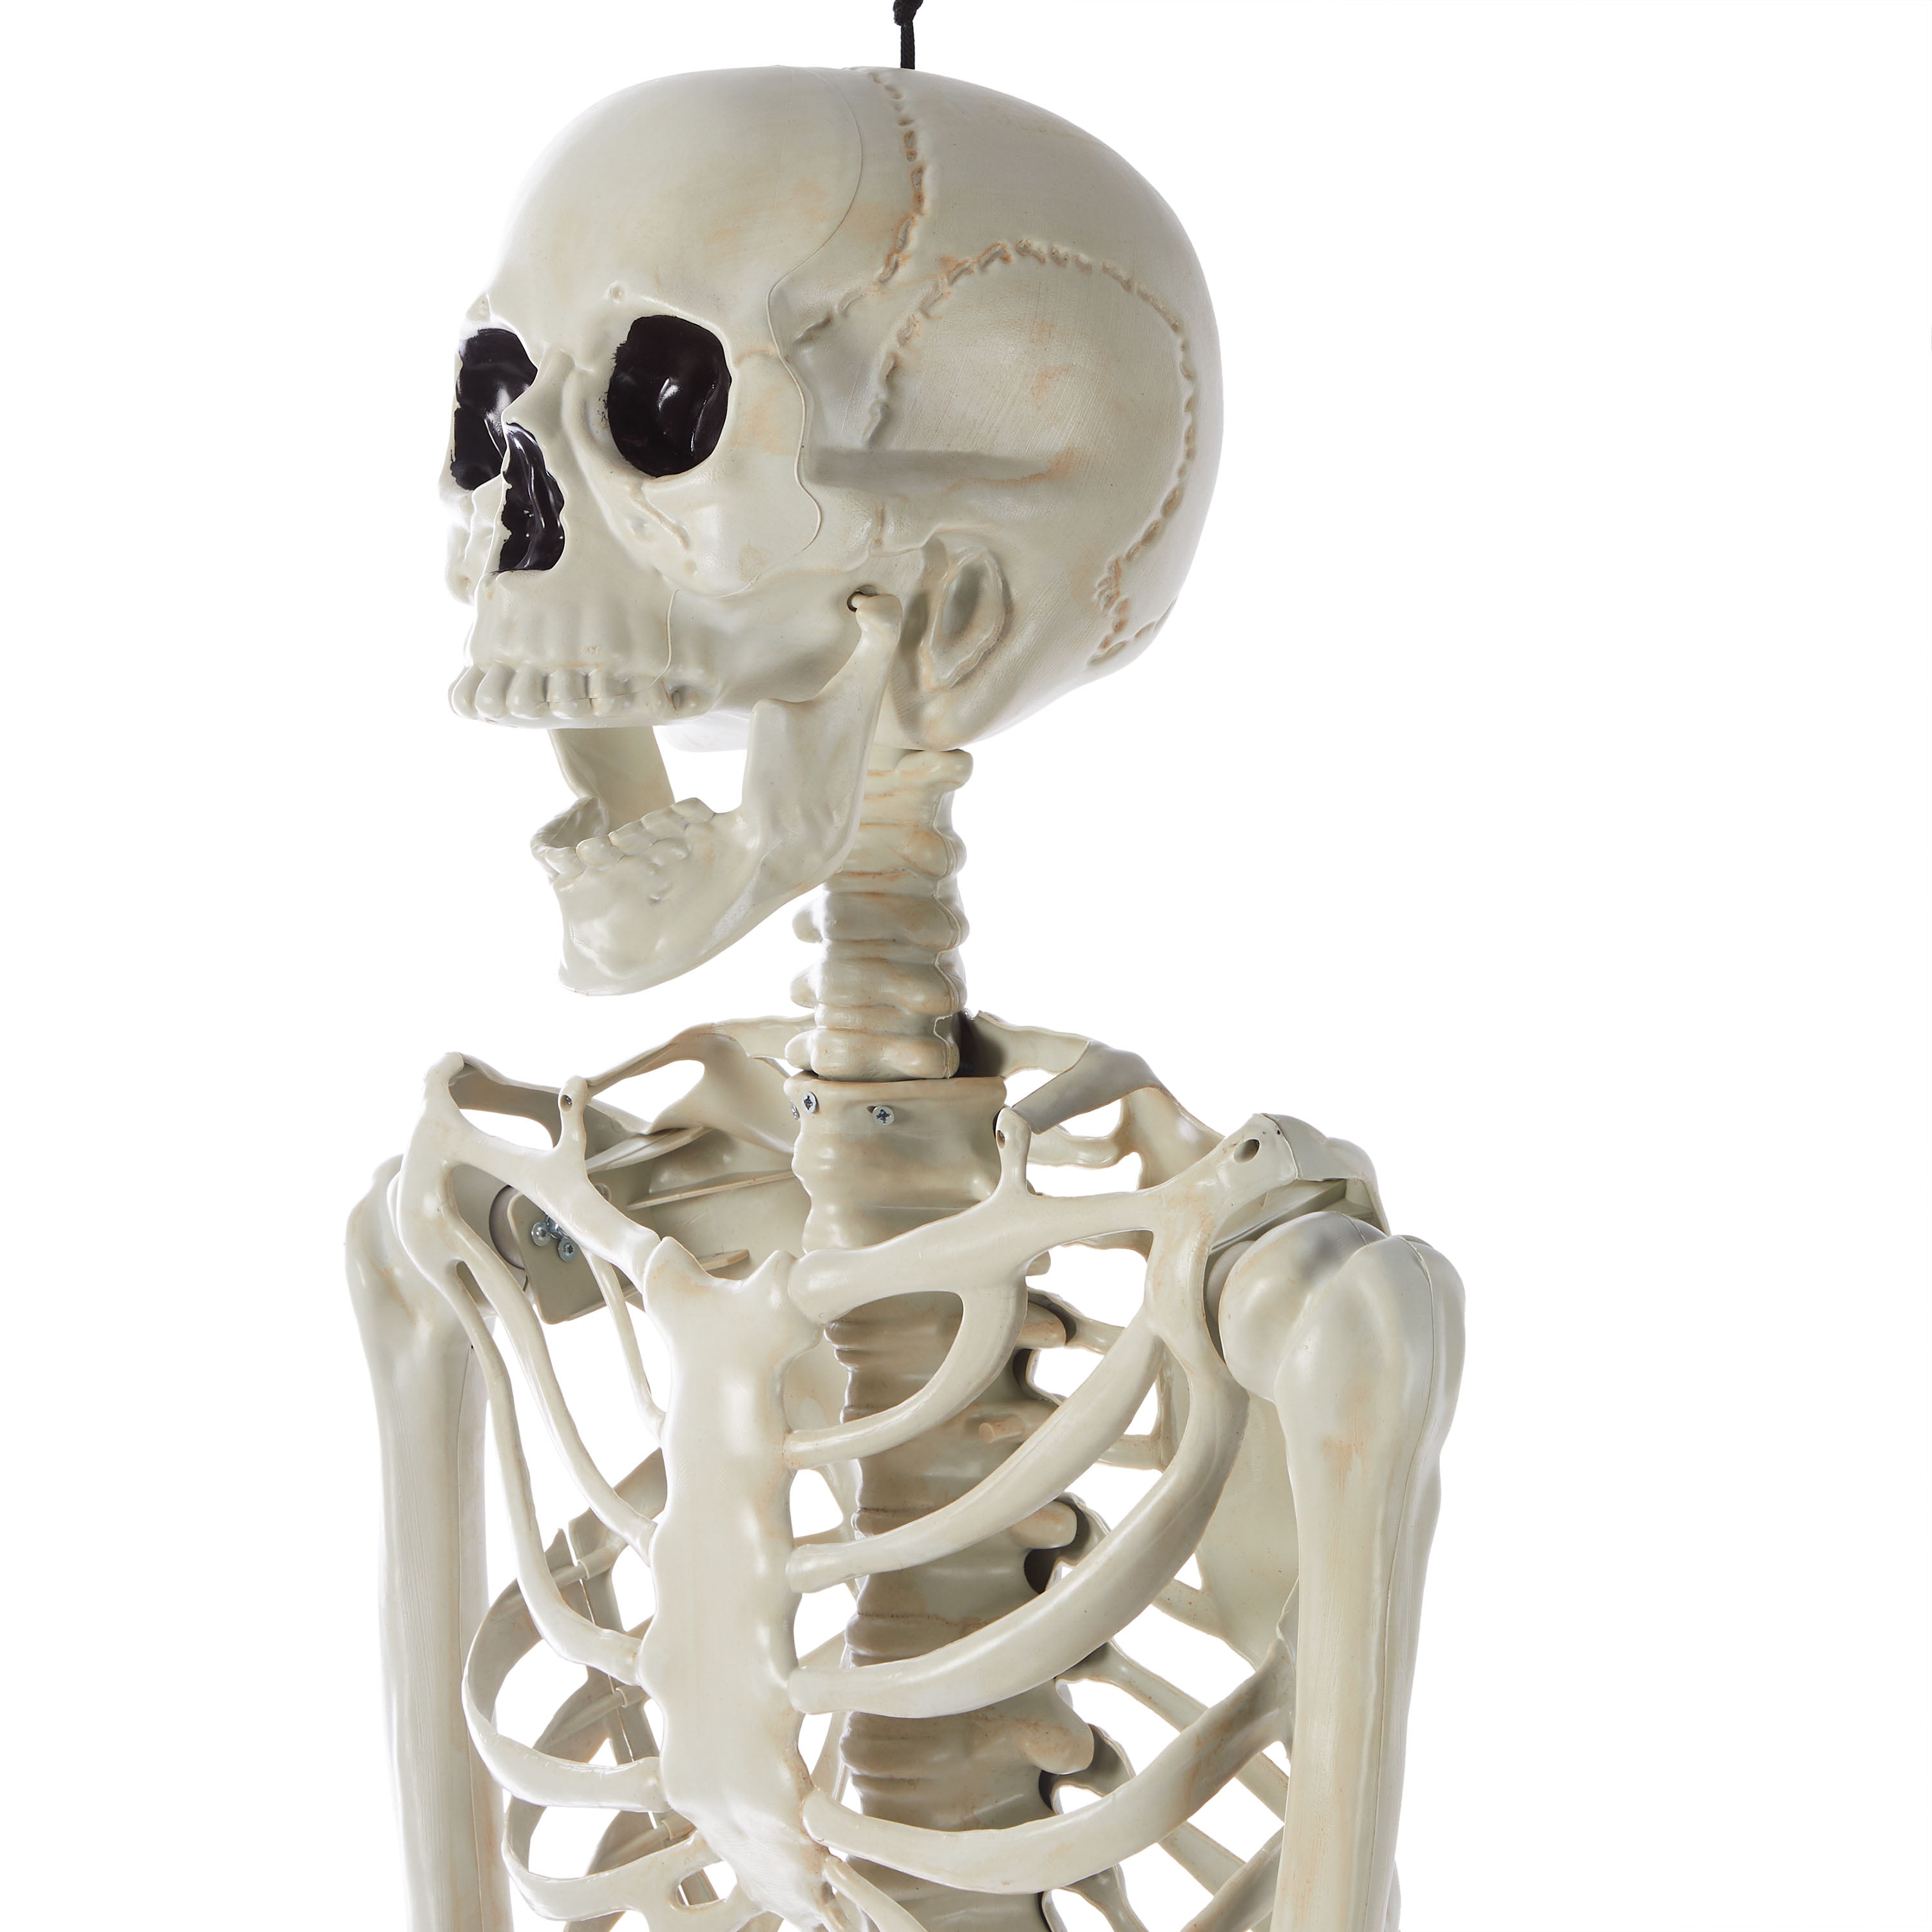 Don't miss out on this $4 Articulated Skeleton from Walmart! 